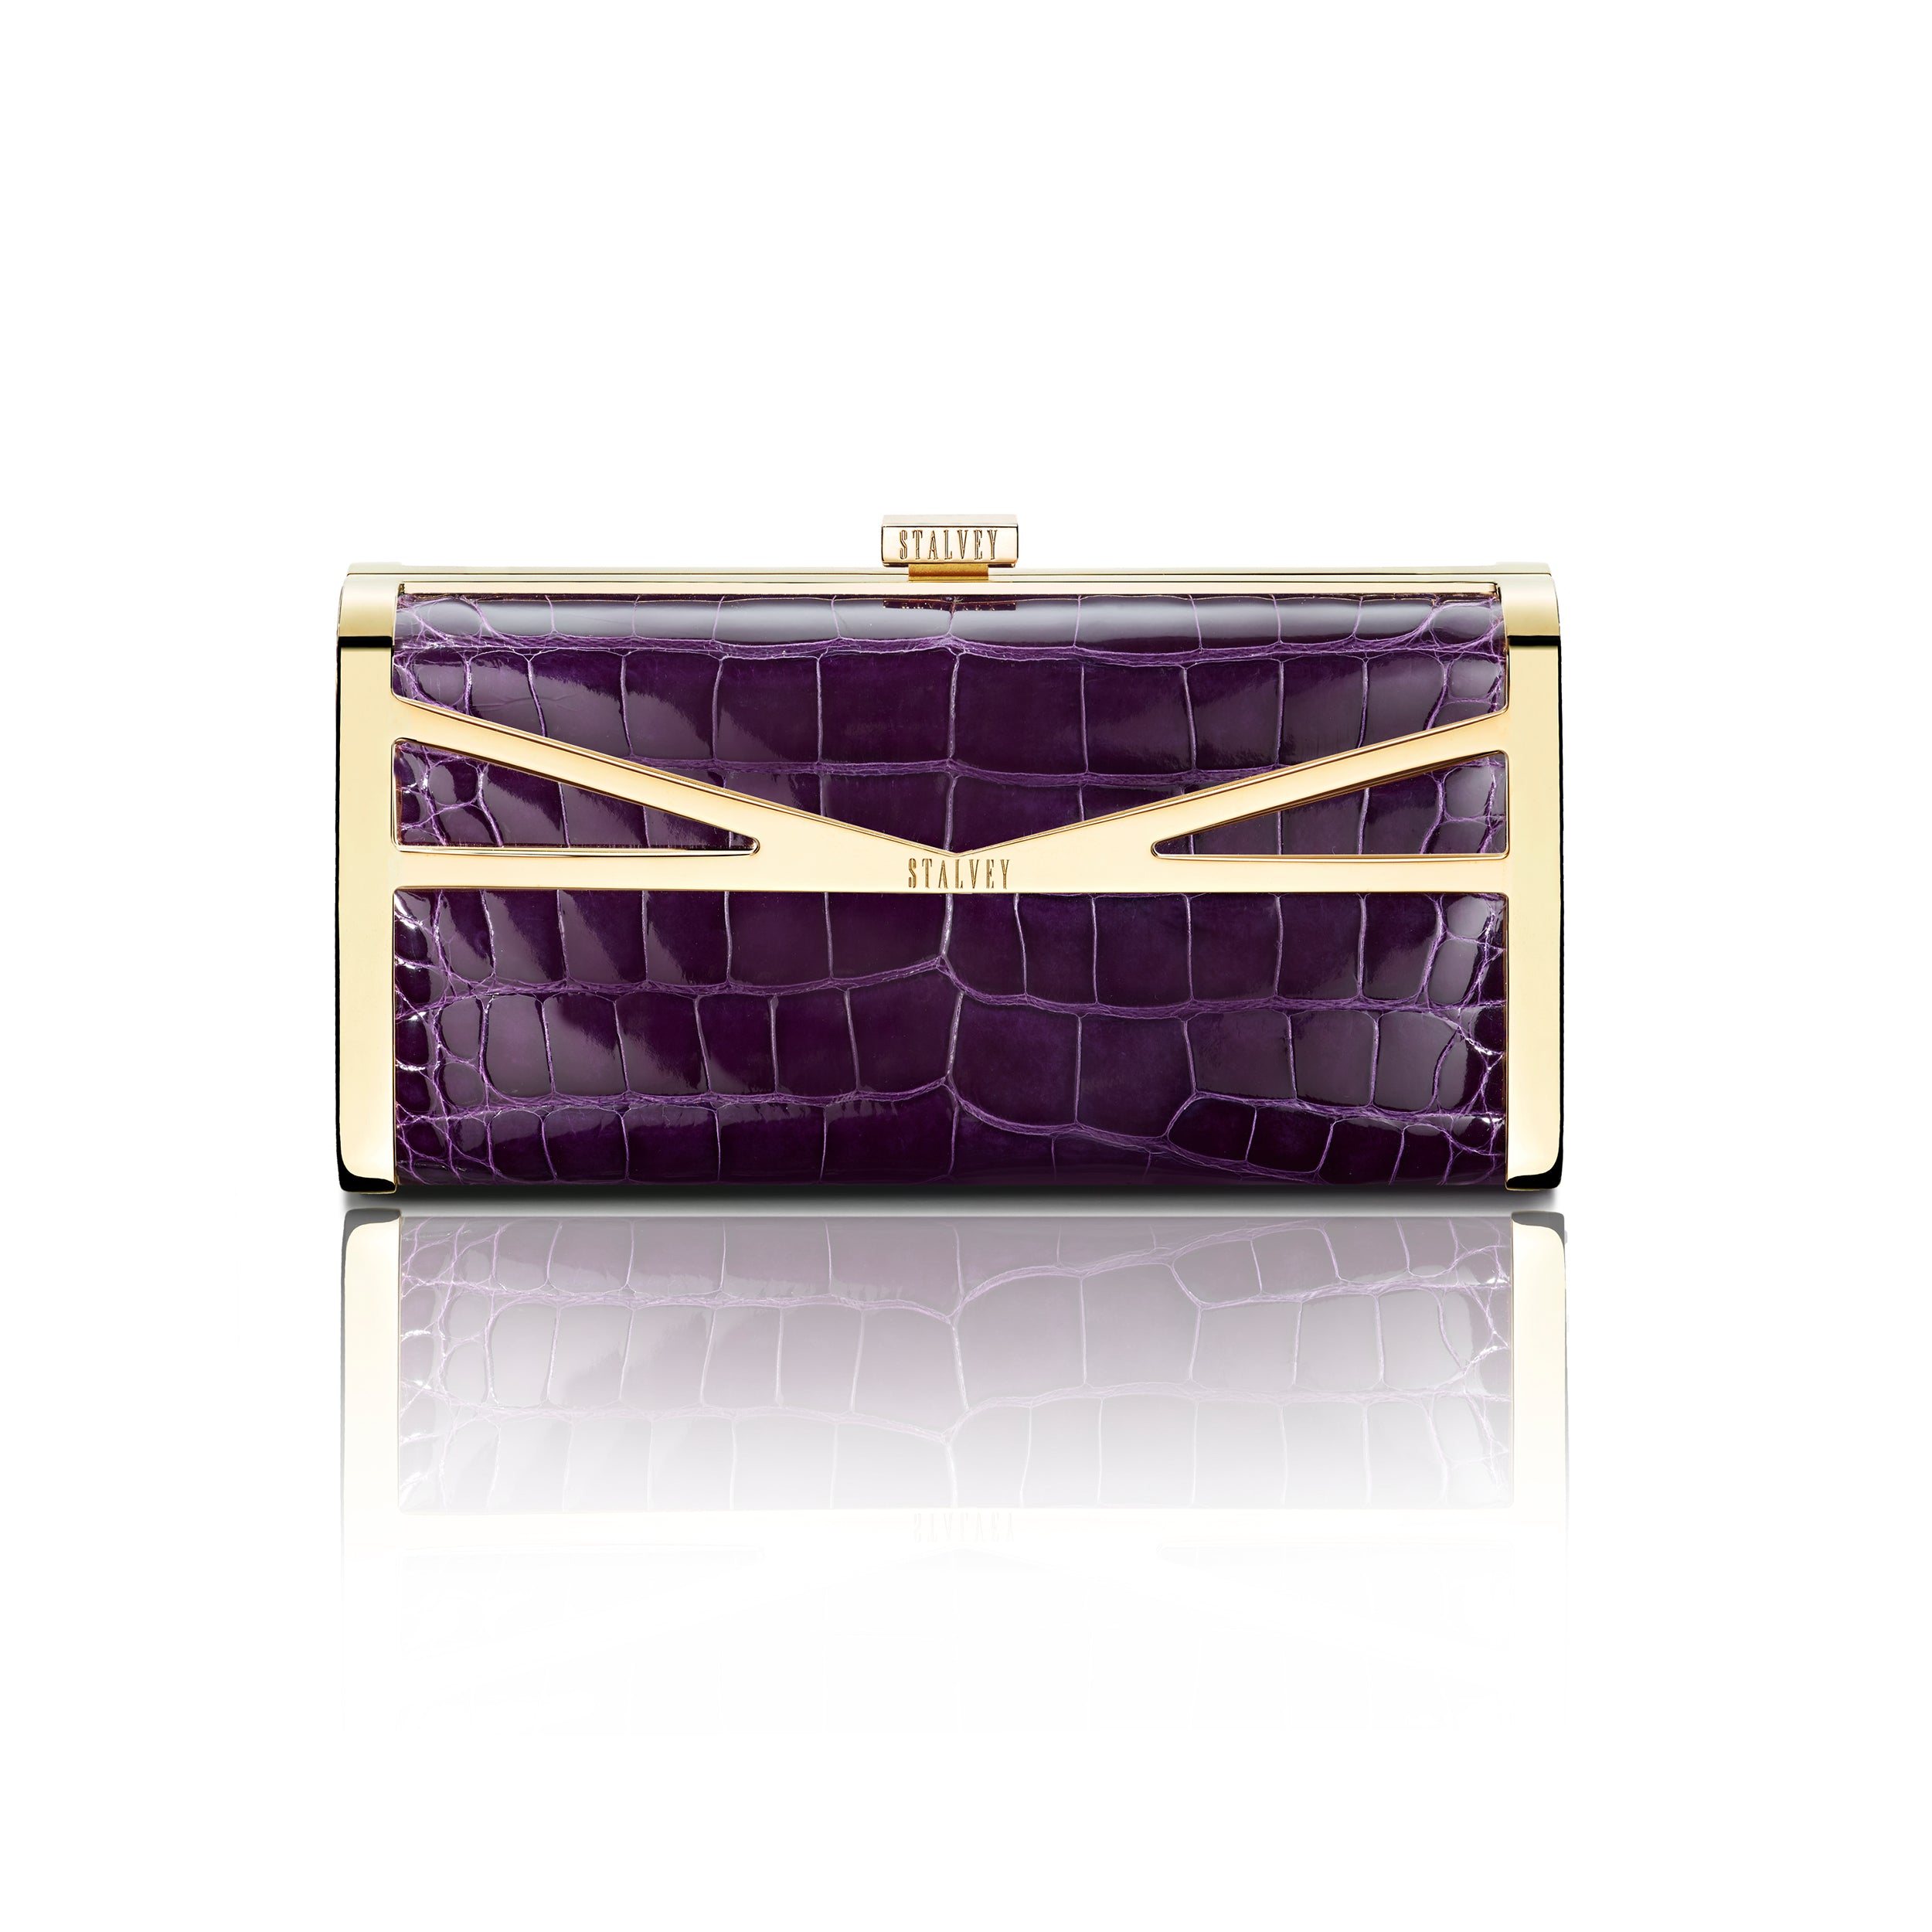 STALVEY Square Clutch in Royal Purple Alligator with 24kt Gold Hardware Front View